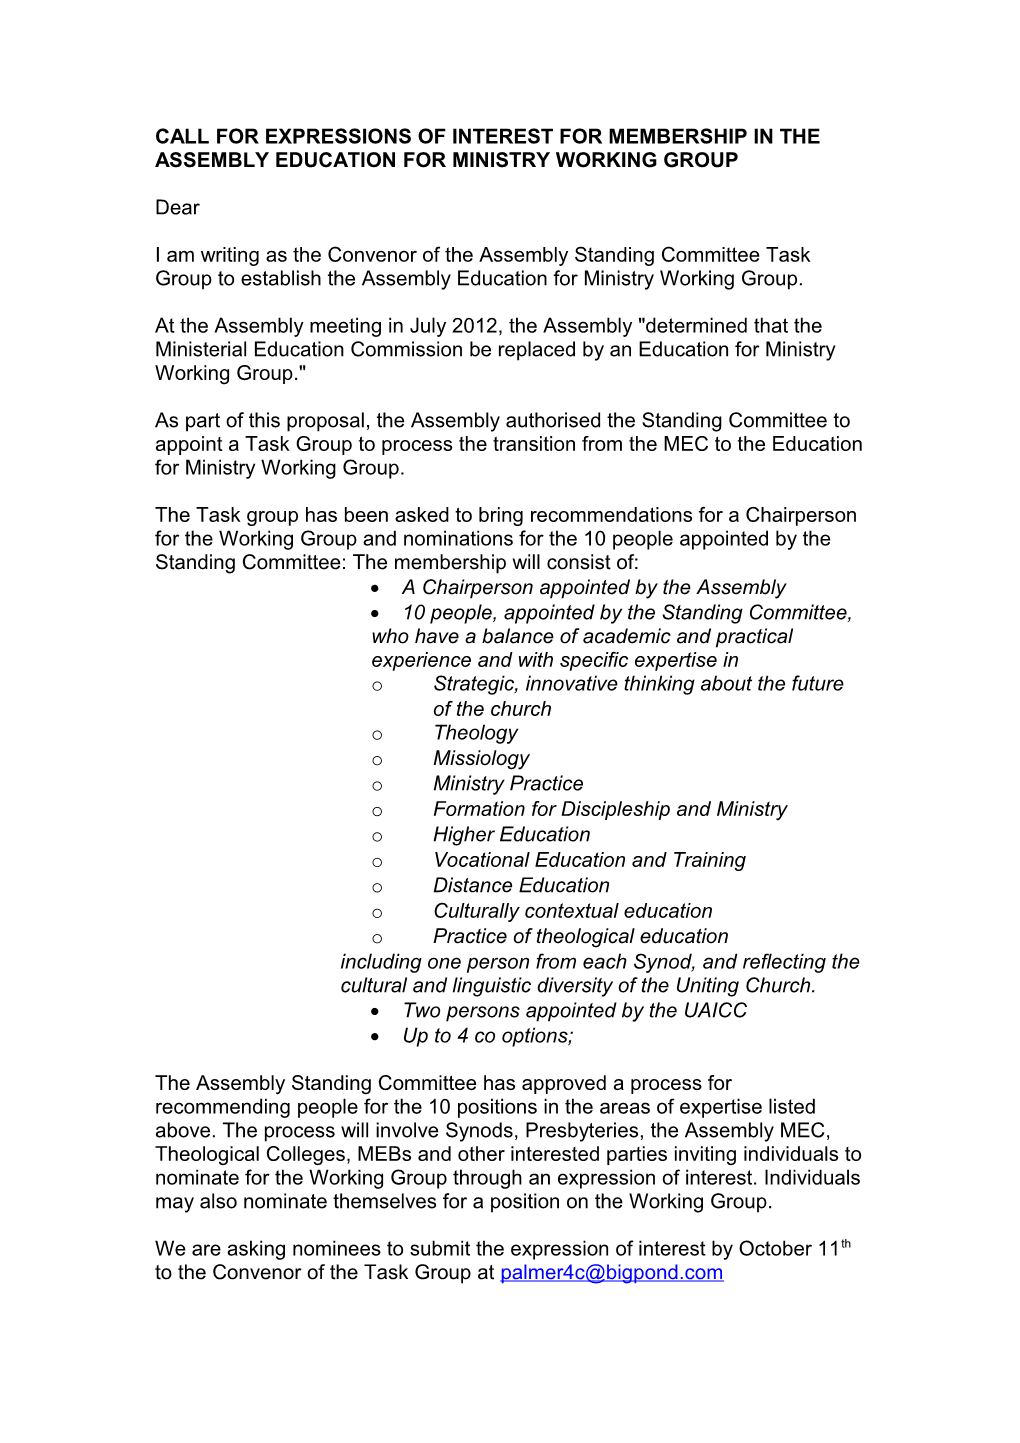 Call for Expressions of Interest for Membership in the Assembly Education for Ministry